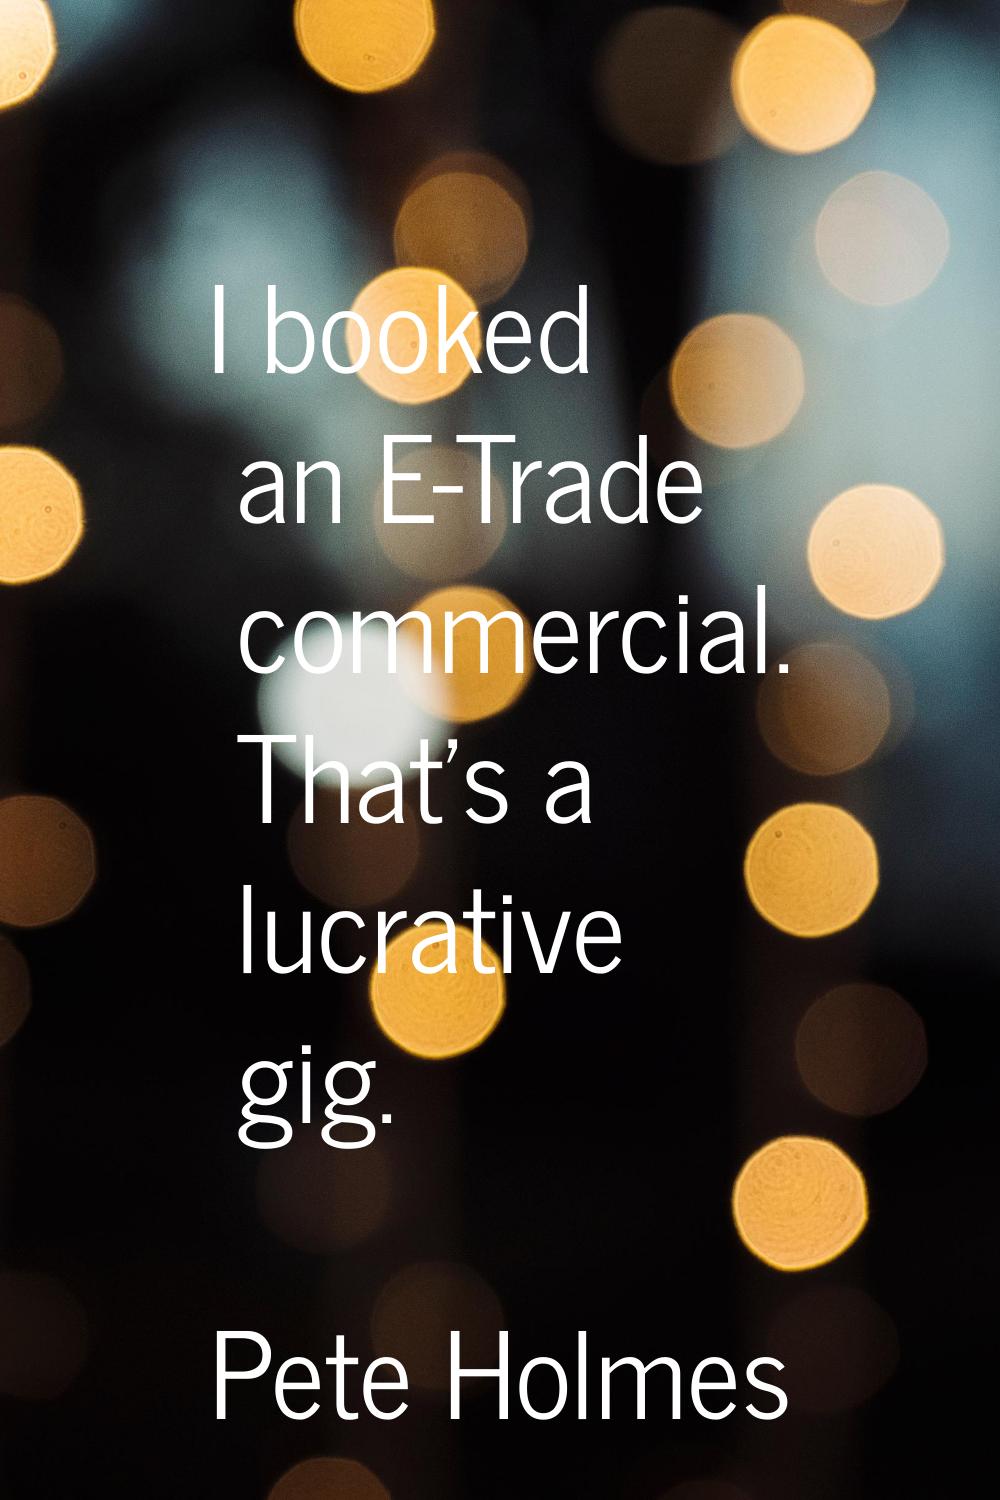 I booked an E-Trade commercial. That's a lucrative gig.